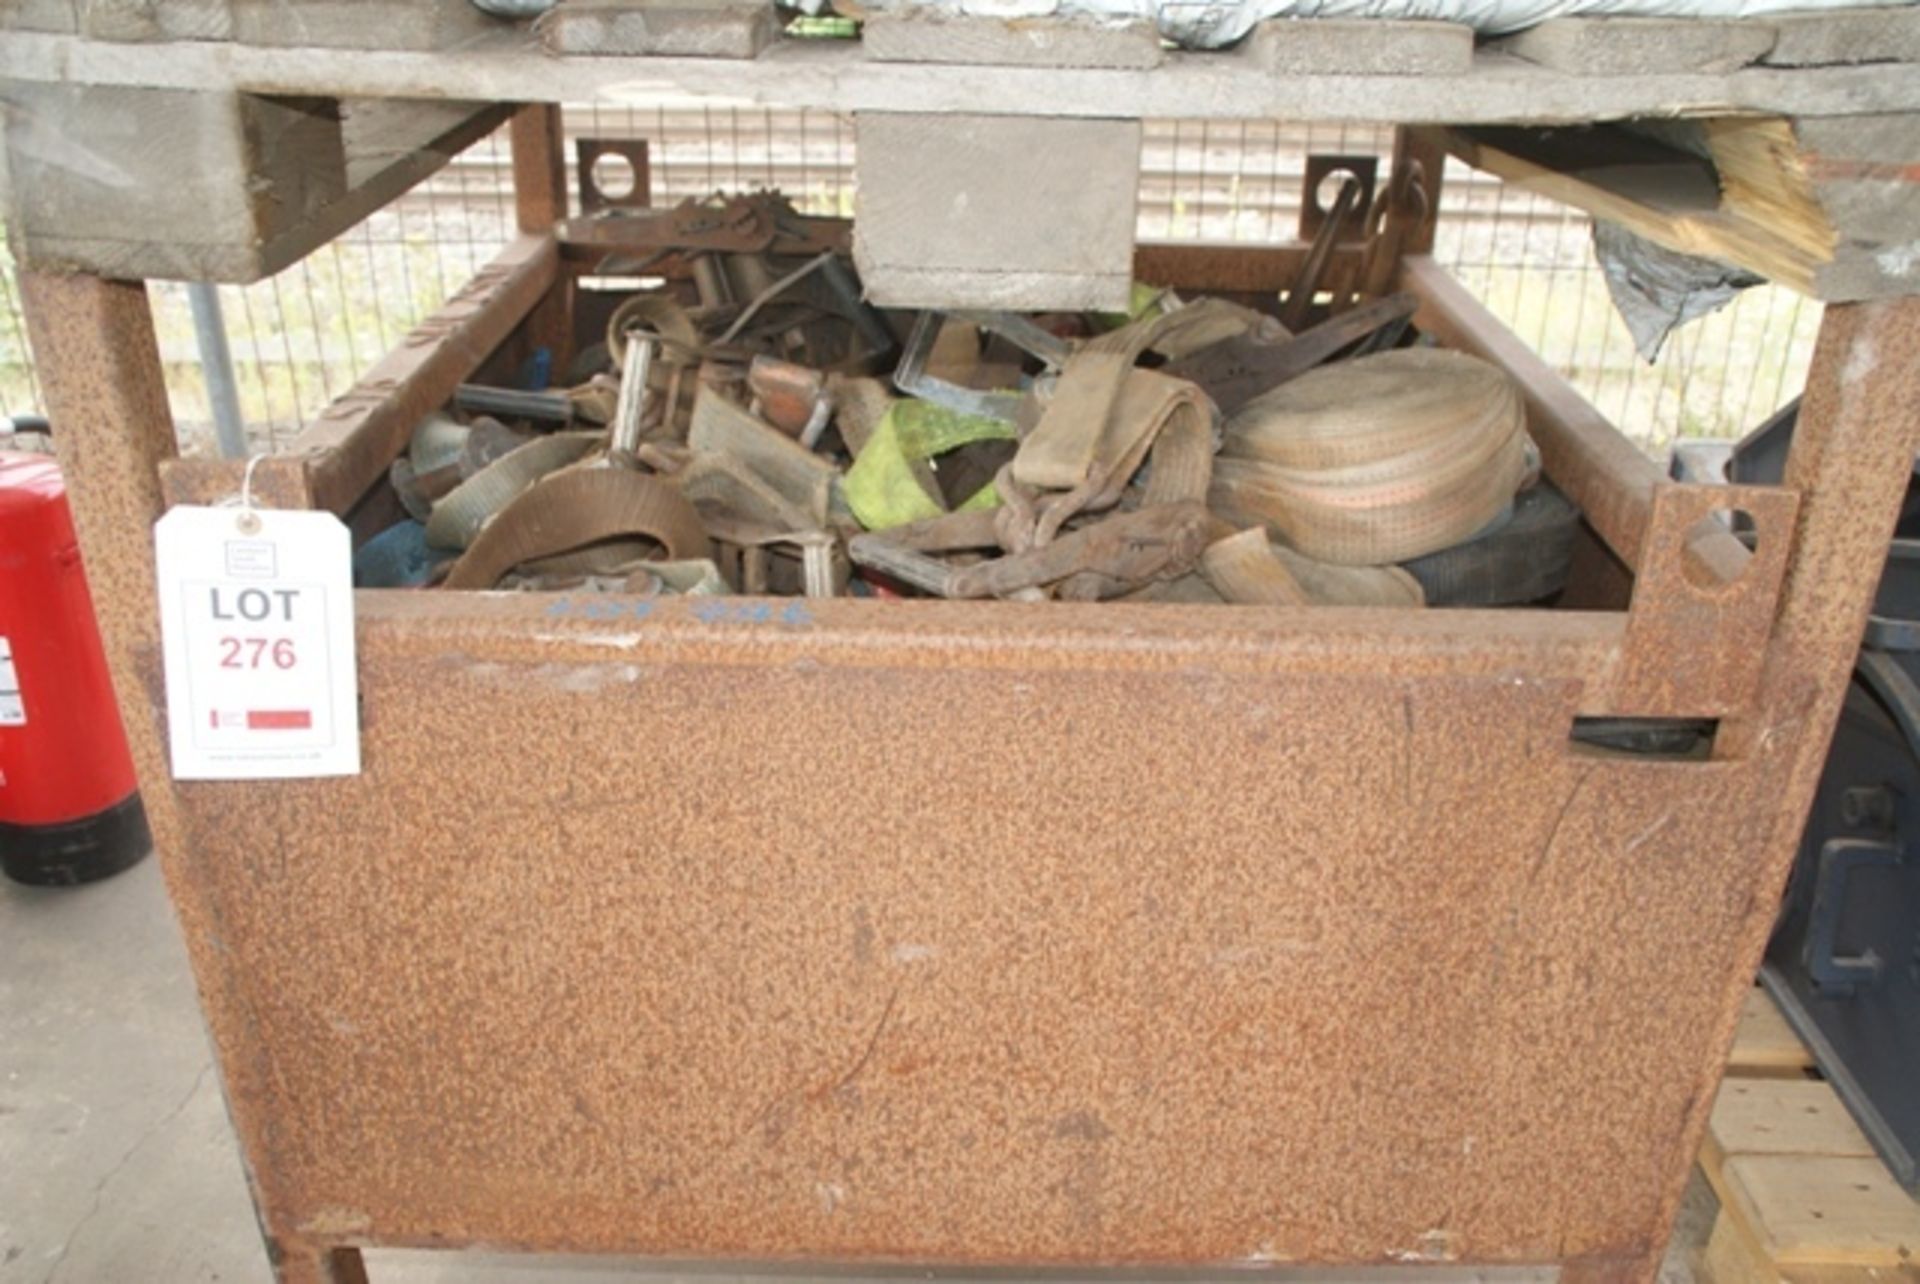 Stillage containing ratchet straps & chains as lotted